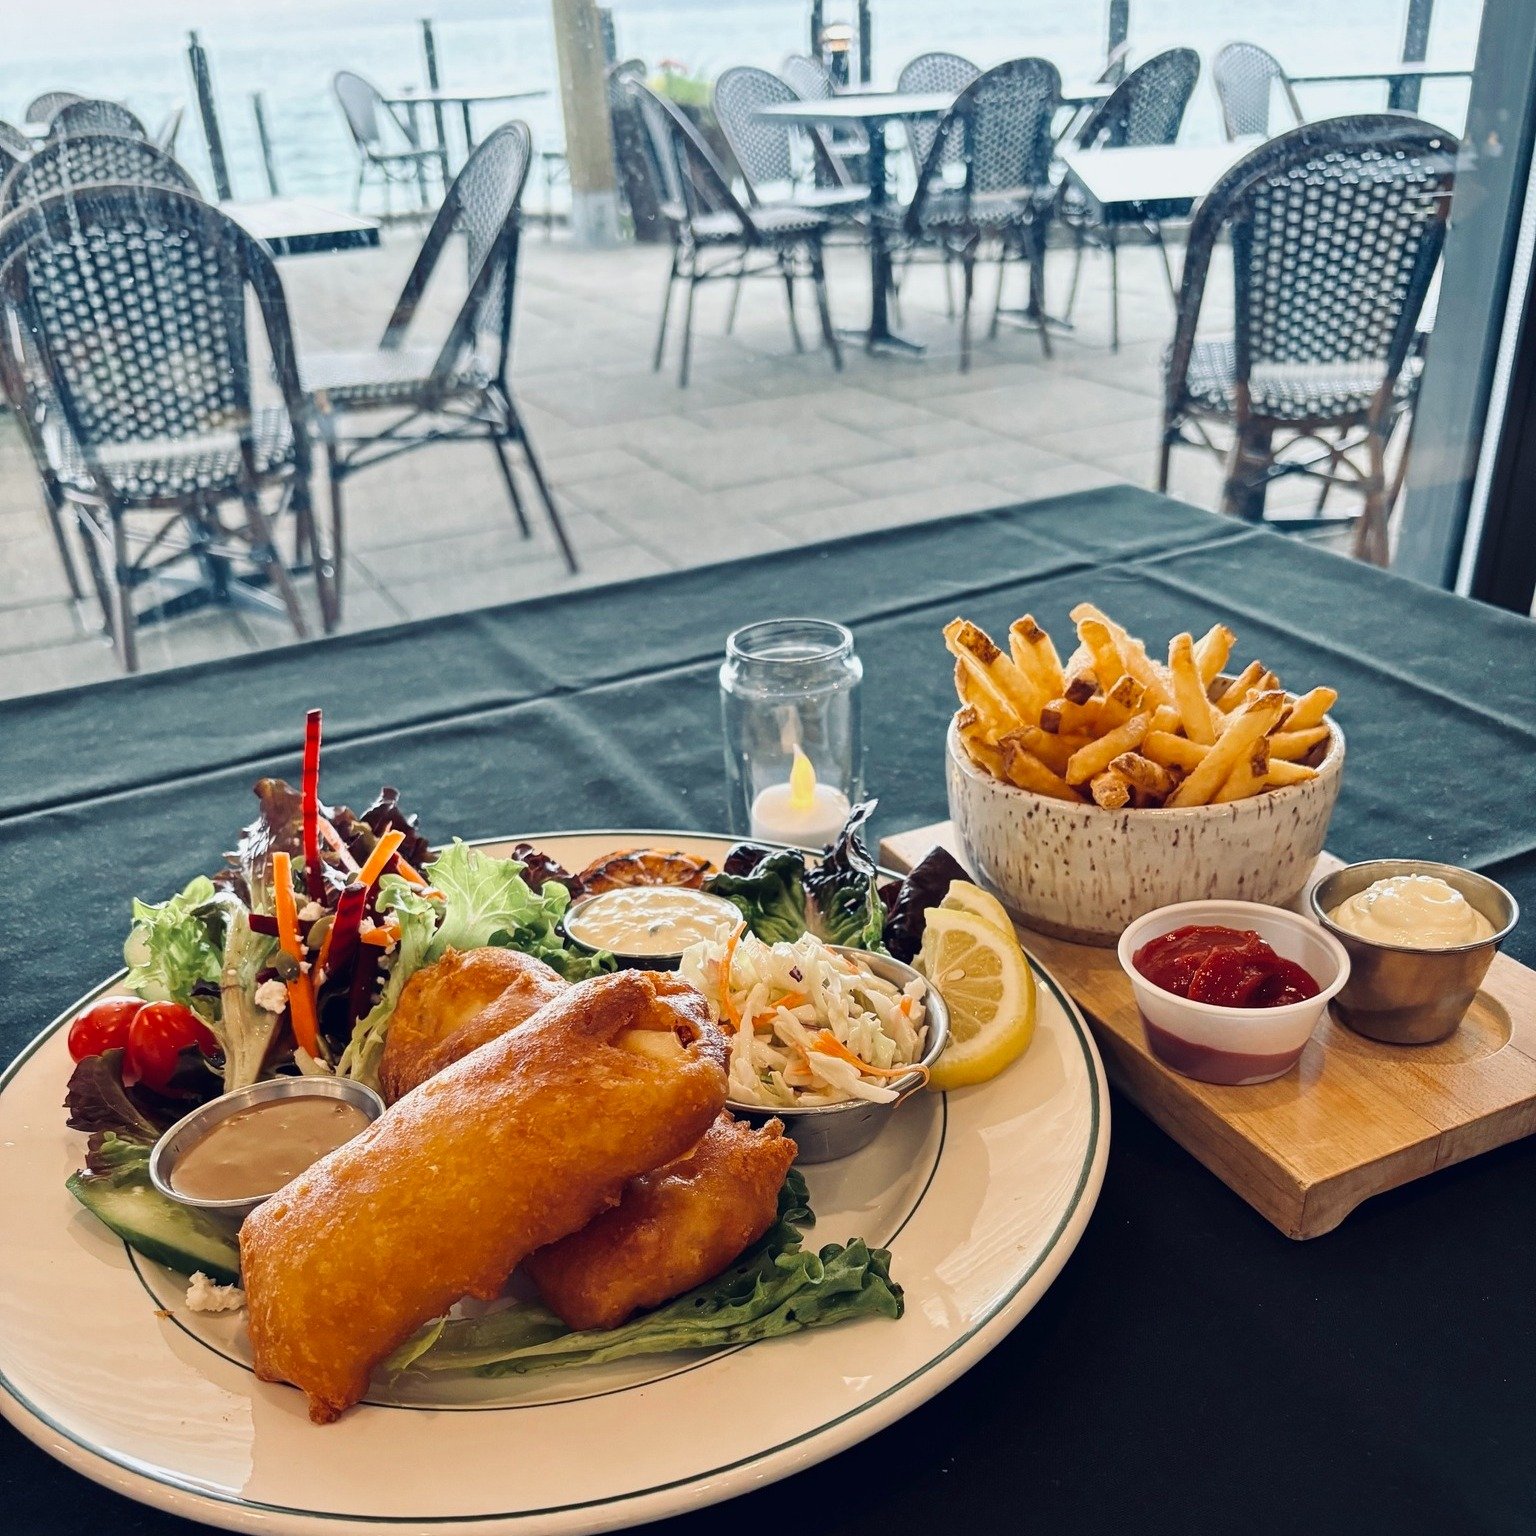 It's Tuesday, which means you can enjoy our Fish &amp; Chips for only $22! 🎣 Line-caught Ling Cod, served with fries + coleslaw, yum 🤤 (Please note: photo shows Fish &amp; Chips meal with a side salad, available for an extra charge)
.
😎 Our patio 